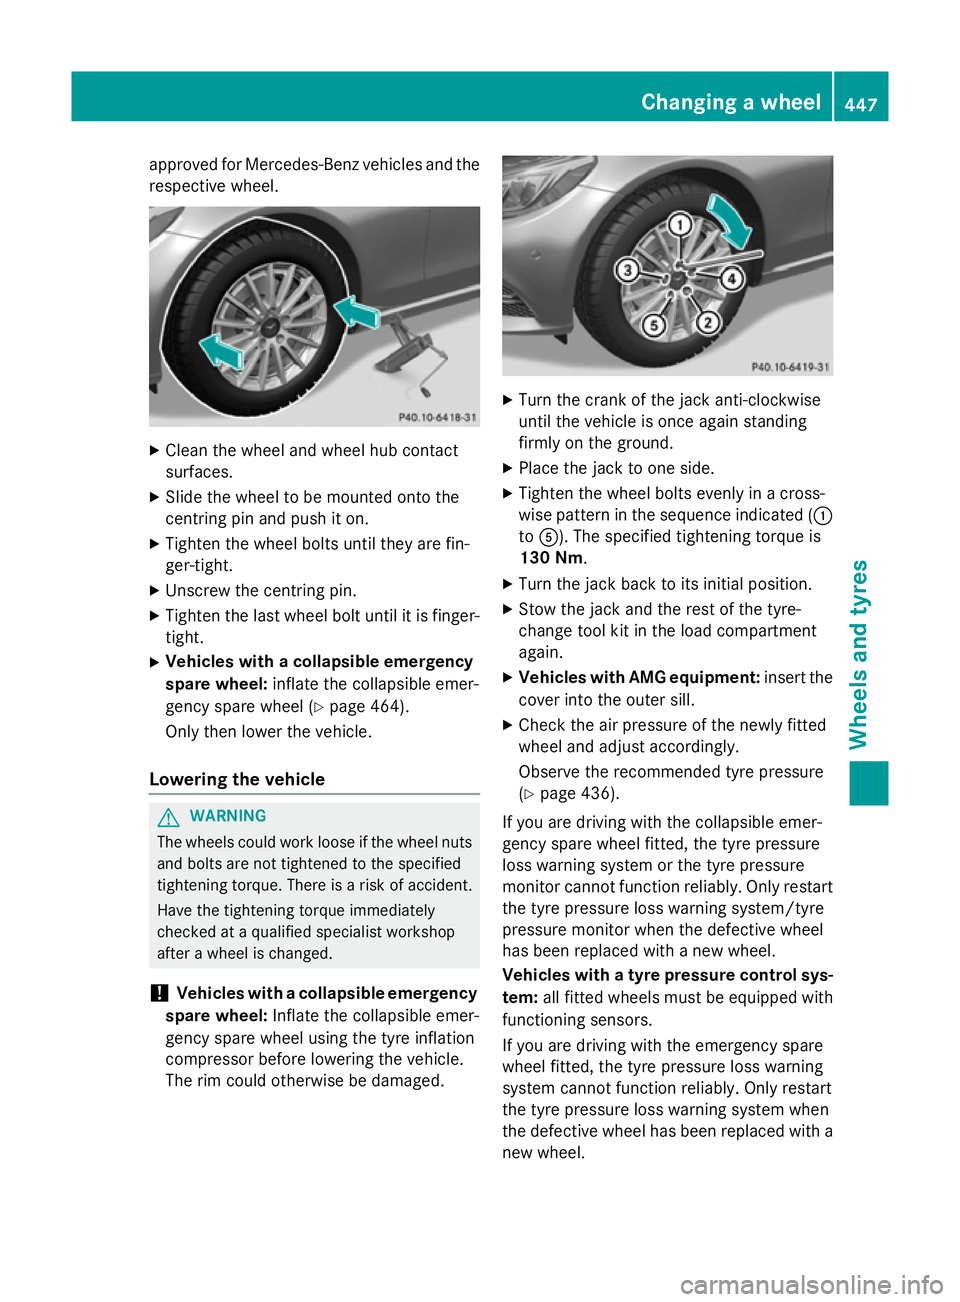 MERCEDES-BENZ C-CLASS ESTATE 2014  Owners Manual approved for Mercedes-Benz vehicles and the
respective wheel. X
Clean the wheel and wheel hub contact
surfaces.
X Slide the wheel to be mounted onto the
centring pin and push it on.
X Tighten the whee